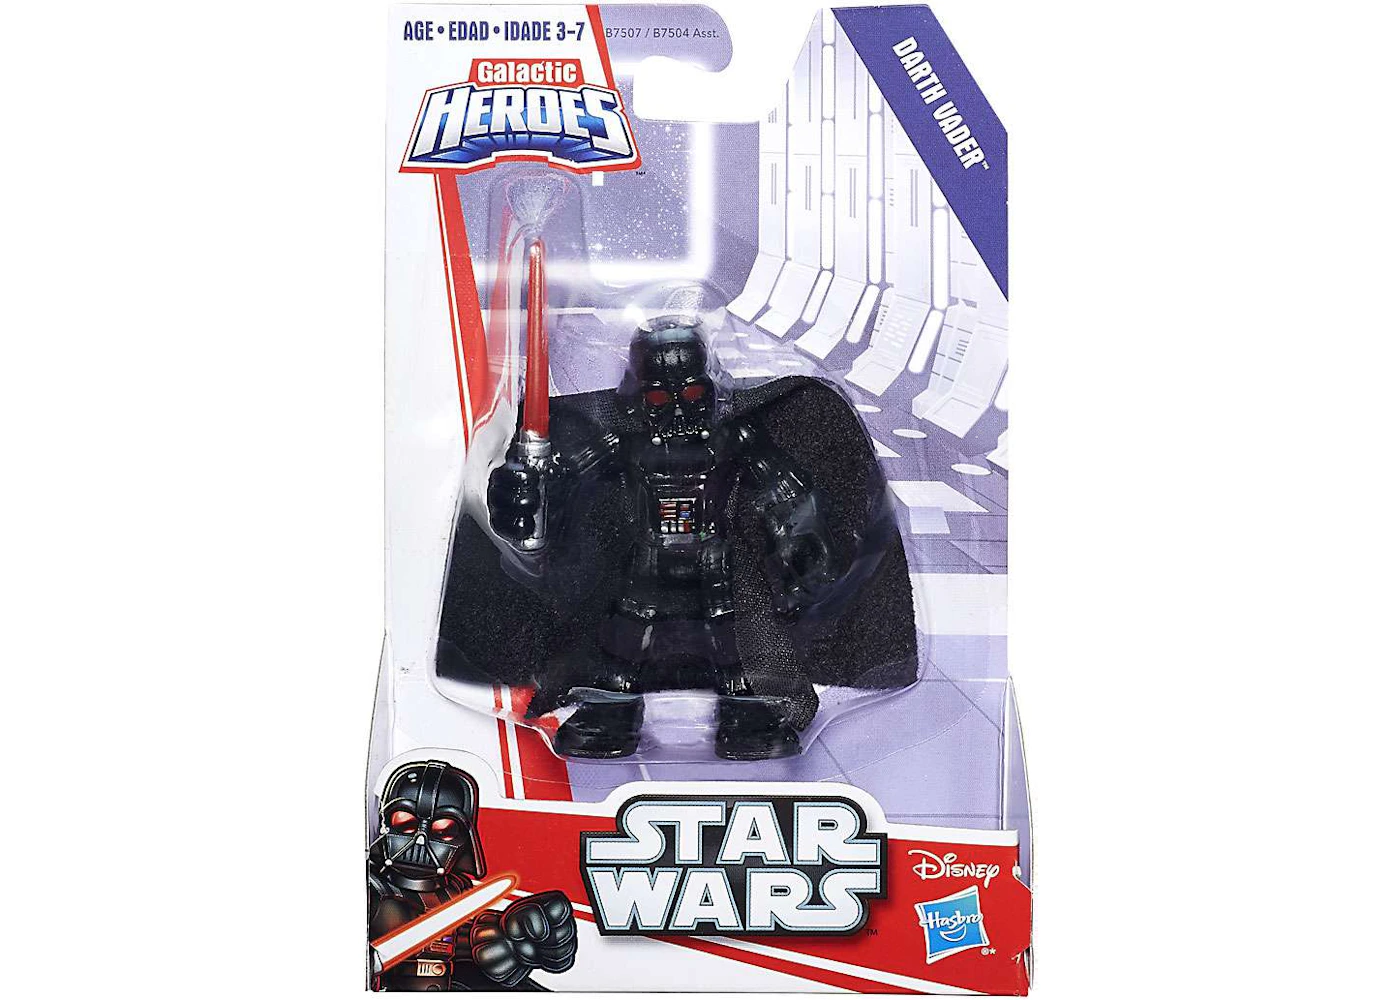 https://images.stockx.com/images/Hasbro-Toys-Star-Wars-Galactic-Heroes-Darth-Vader-No-Droid-Mini-Figure.jpg?fit=fill&bg=FFFFFF&w=700&h=500&fm=webp&auto=compress&q=90&dpr=2&trim=color&updated_at=1656472530?height=78&width=78